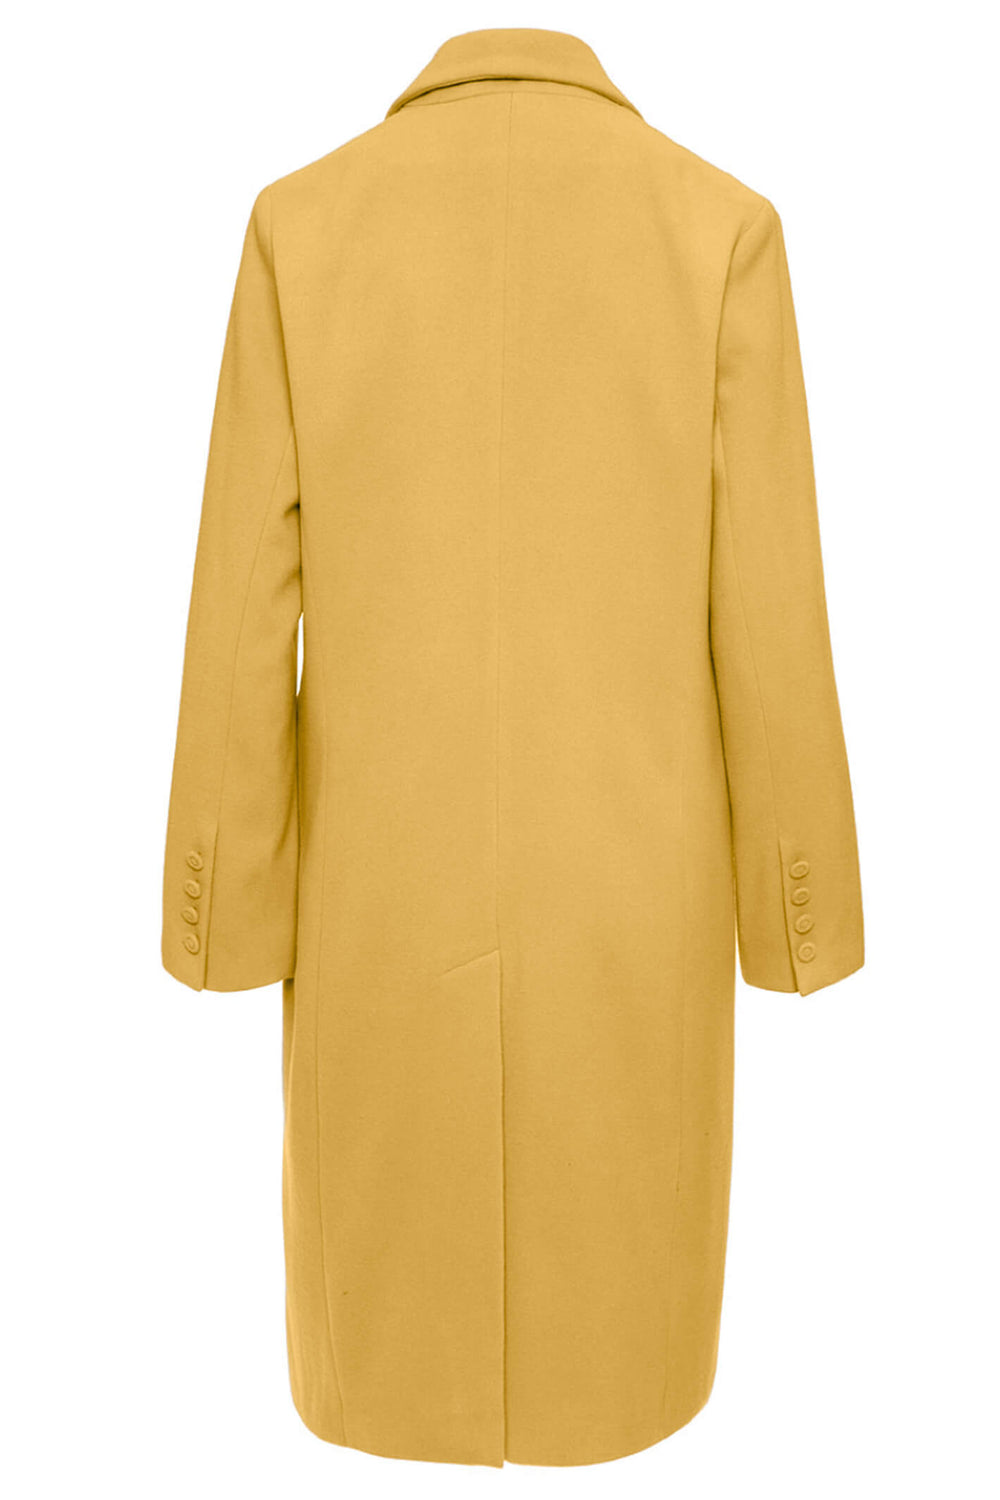 Access Fashion 9022-304 Citrus Yellow Double Breasted Coat - Experience Boutique